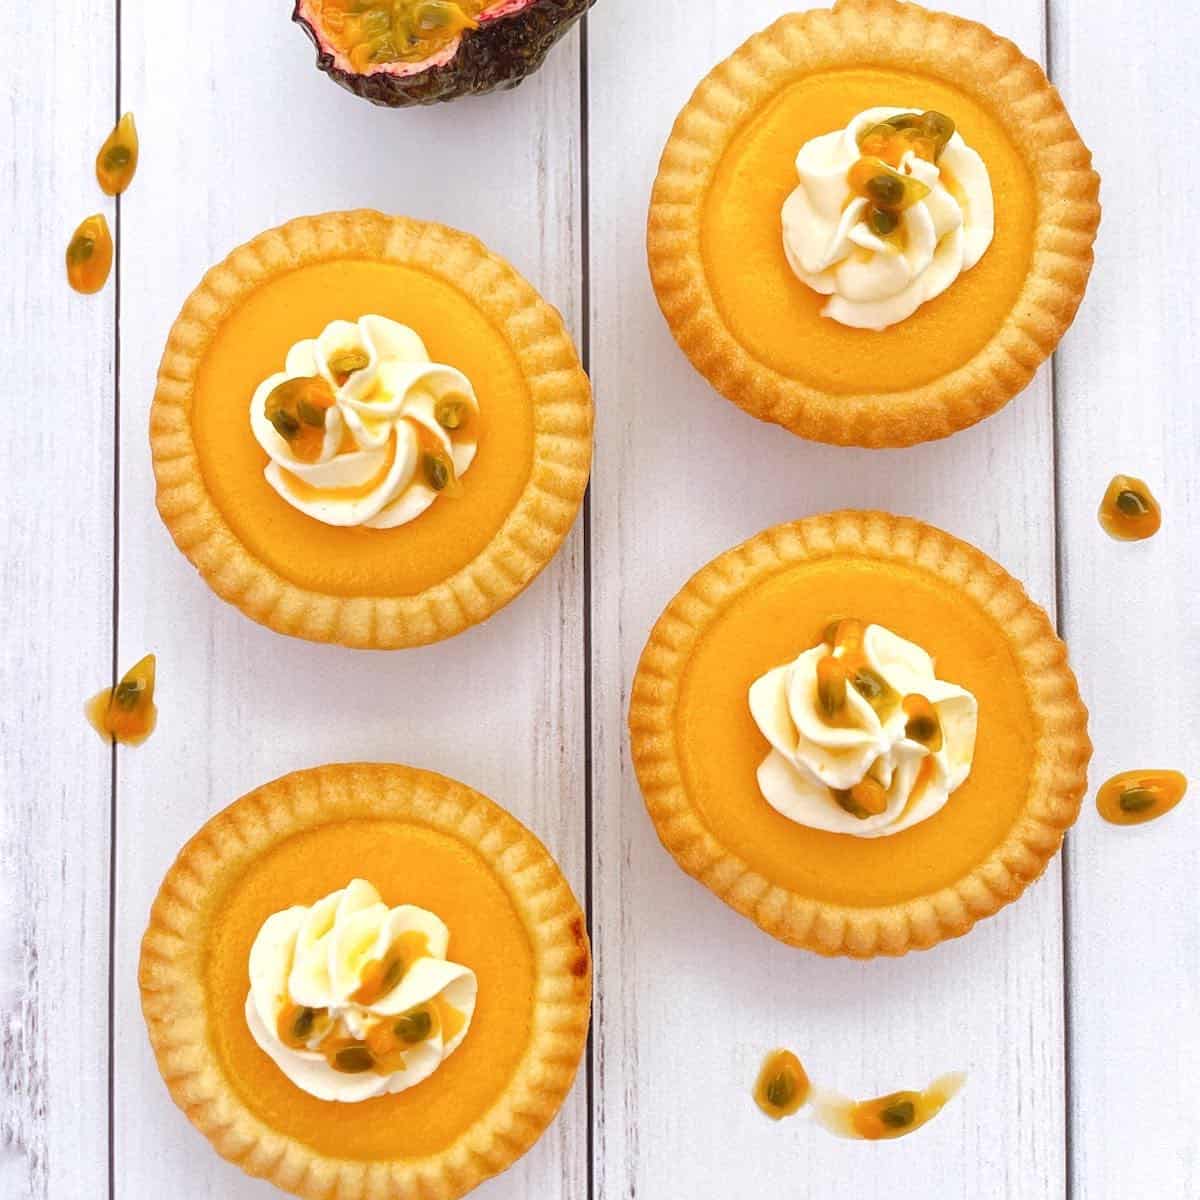 Thermomix Passion fruit tarts